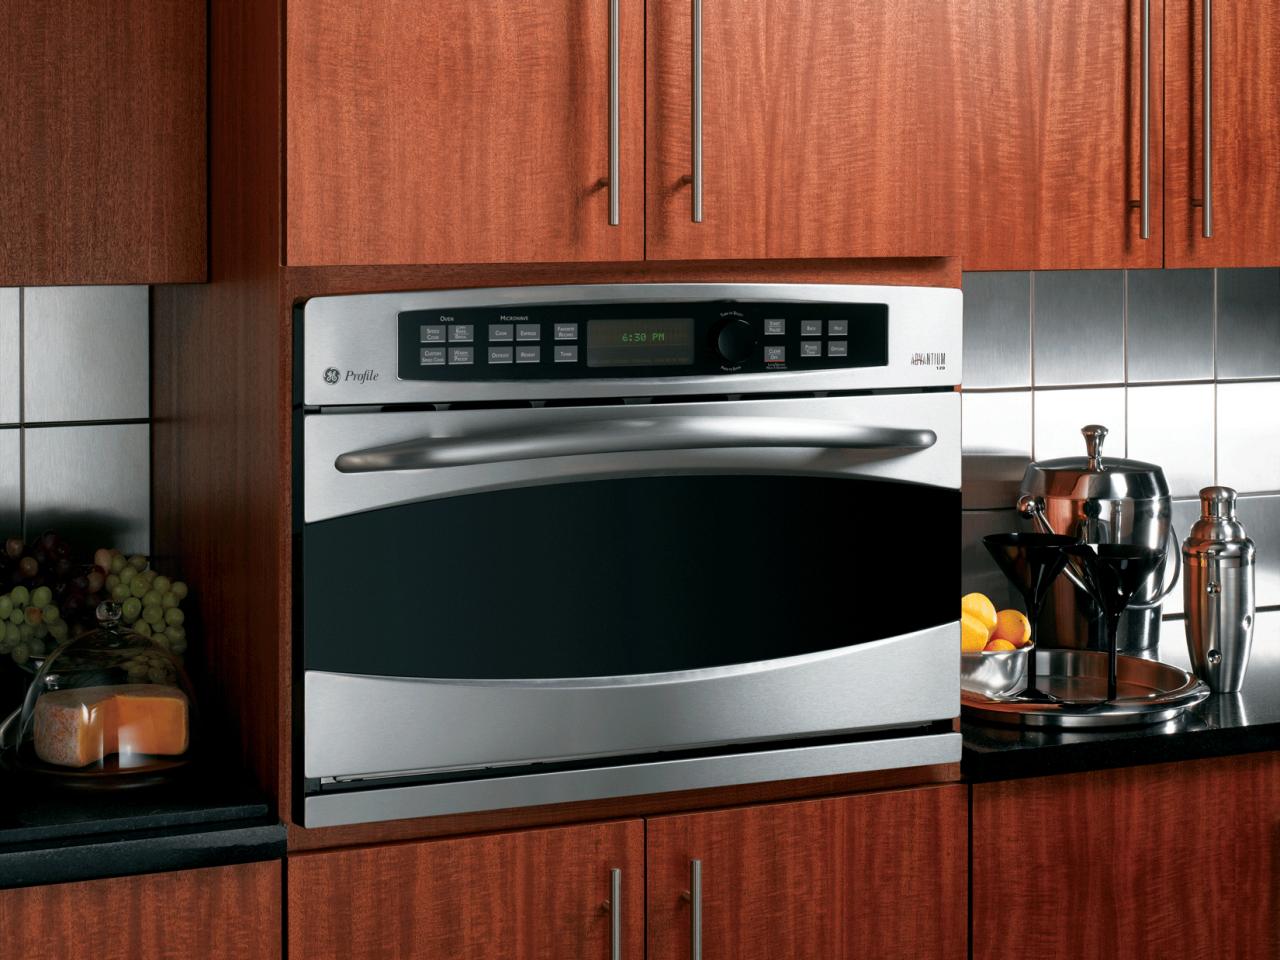 wall oven buying guide | hgtv